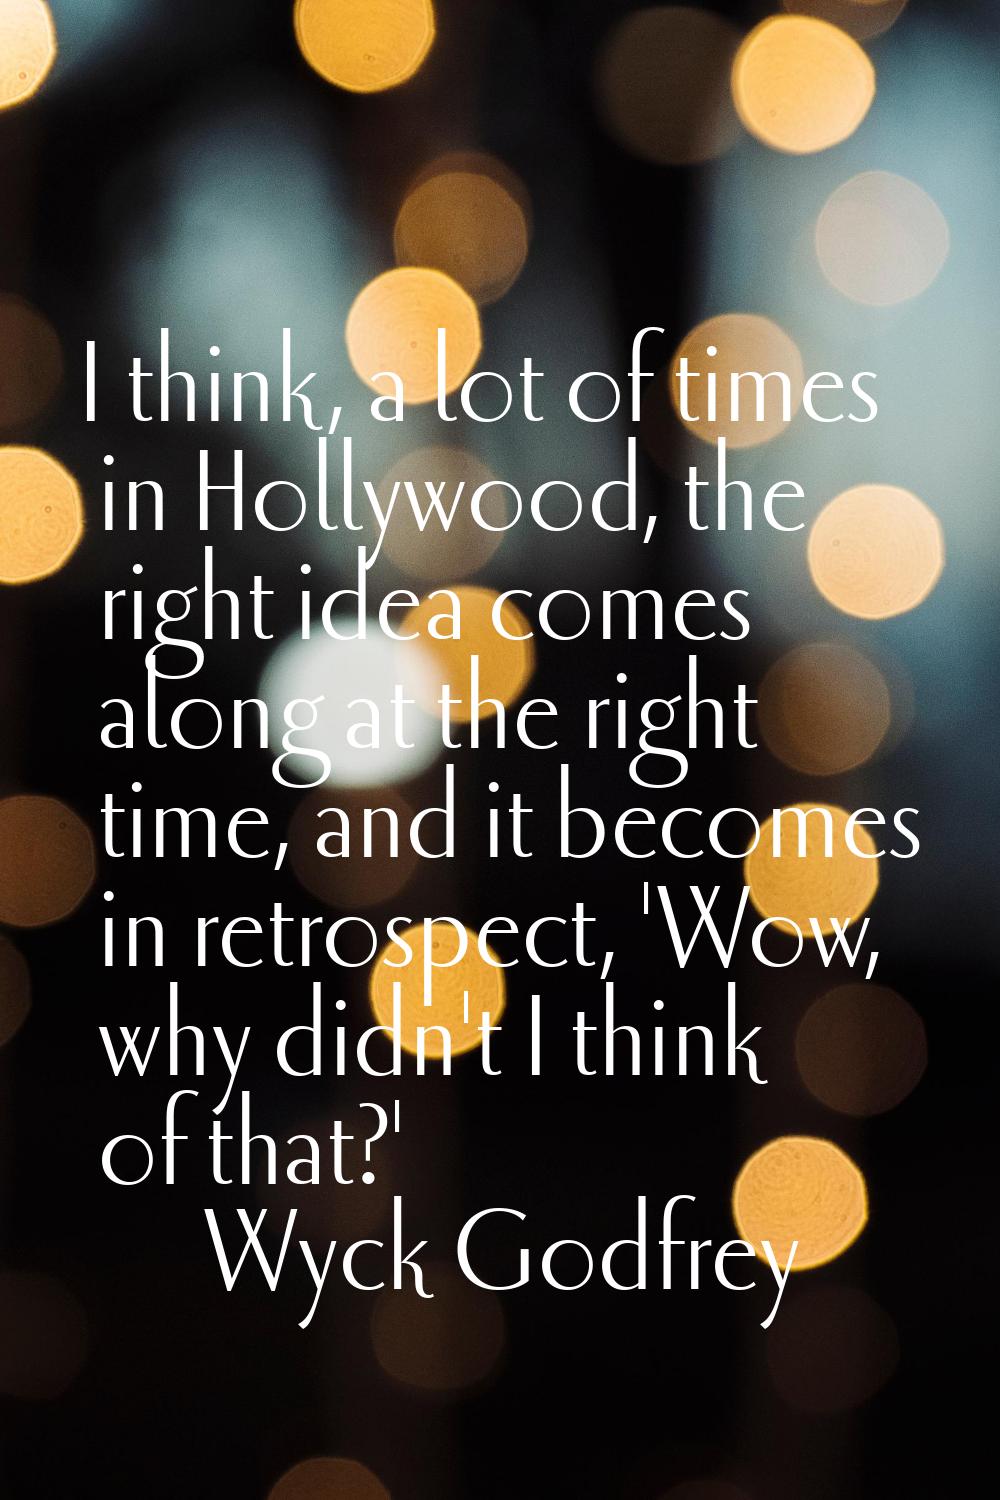 I think, a lot of times in Hollywood, the right idea comes along at the right time, and it becomes 